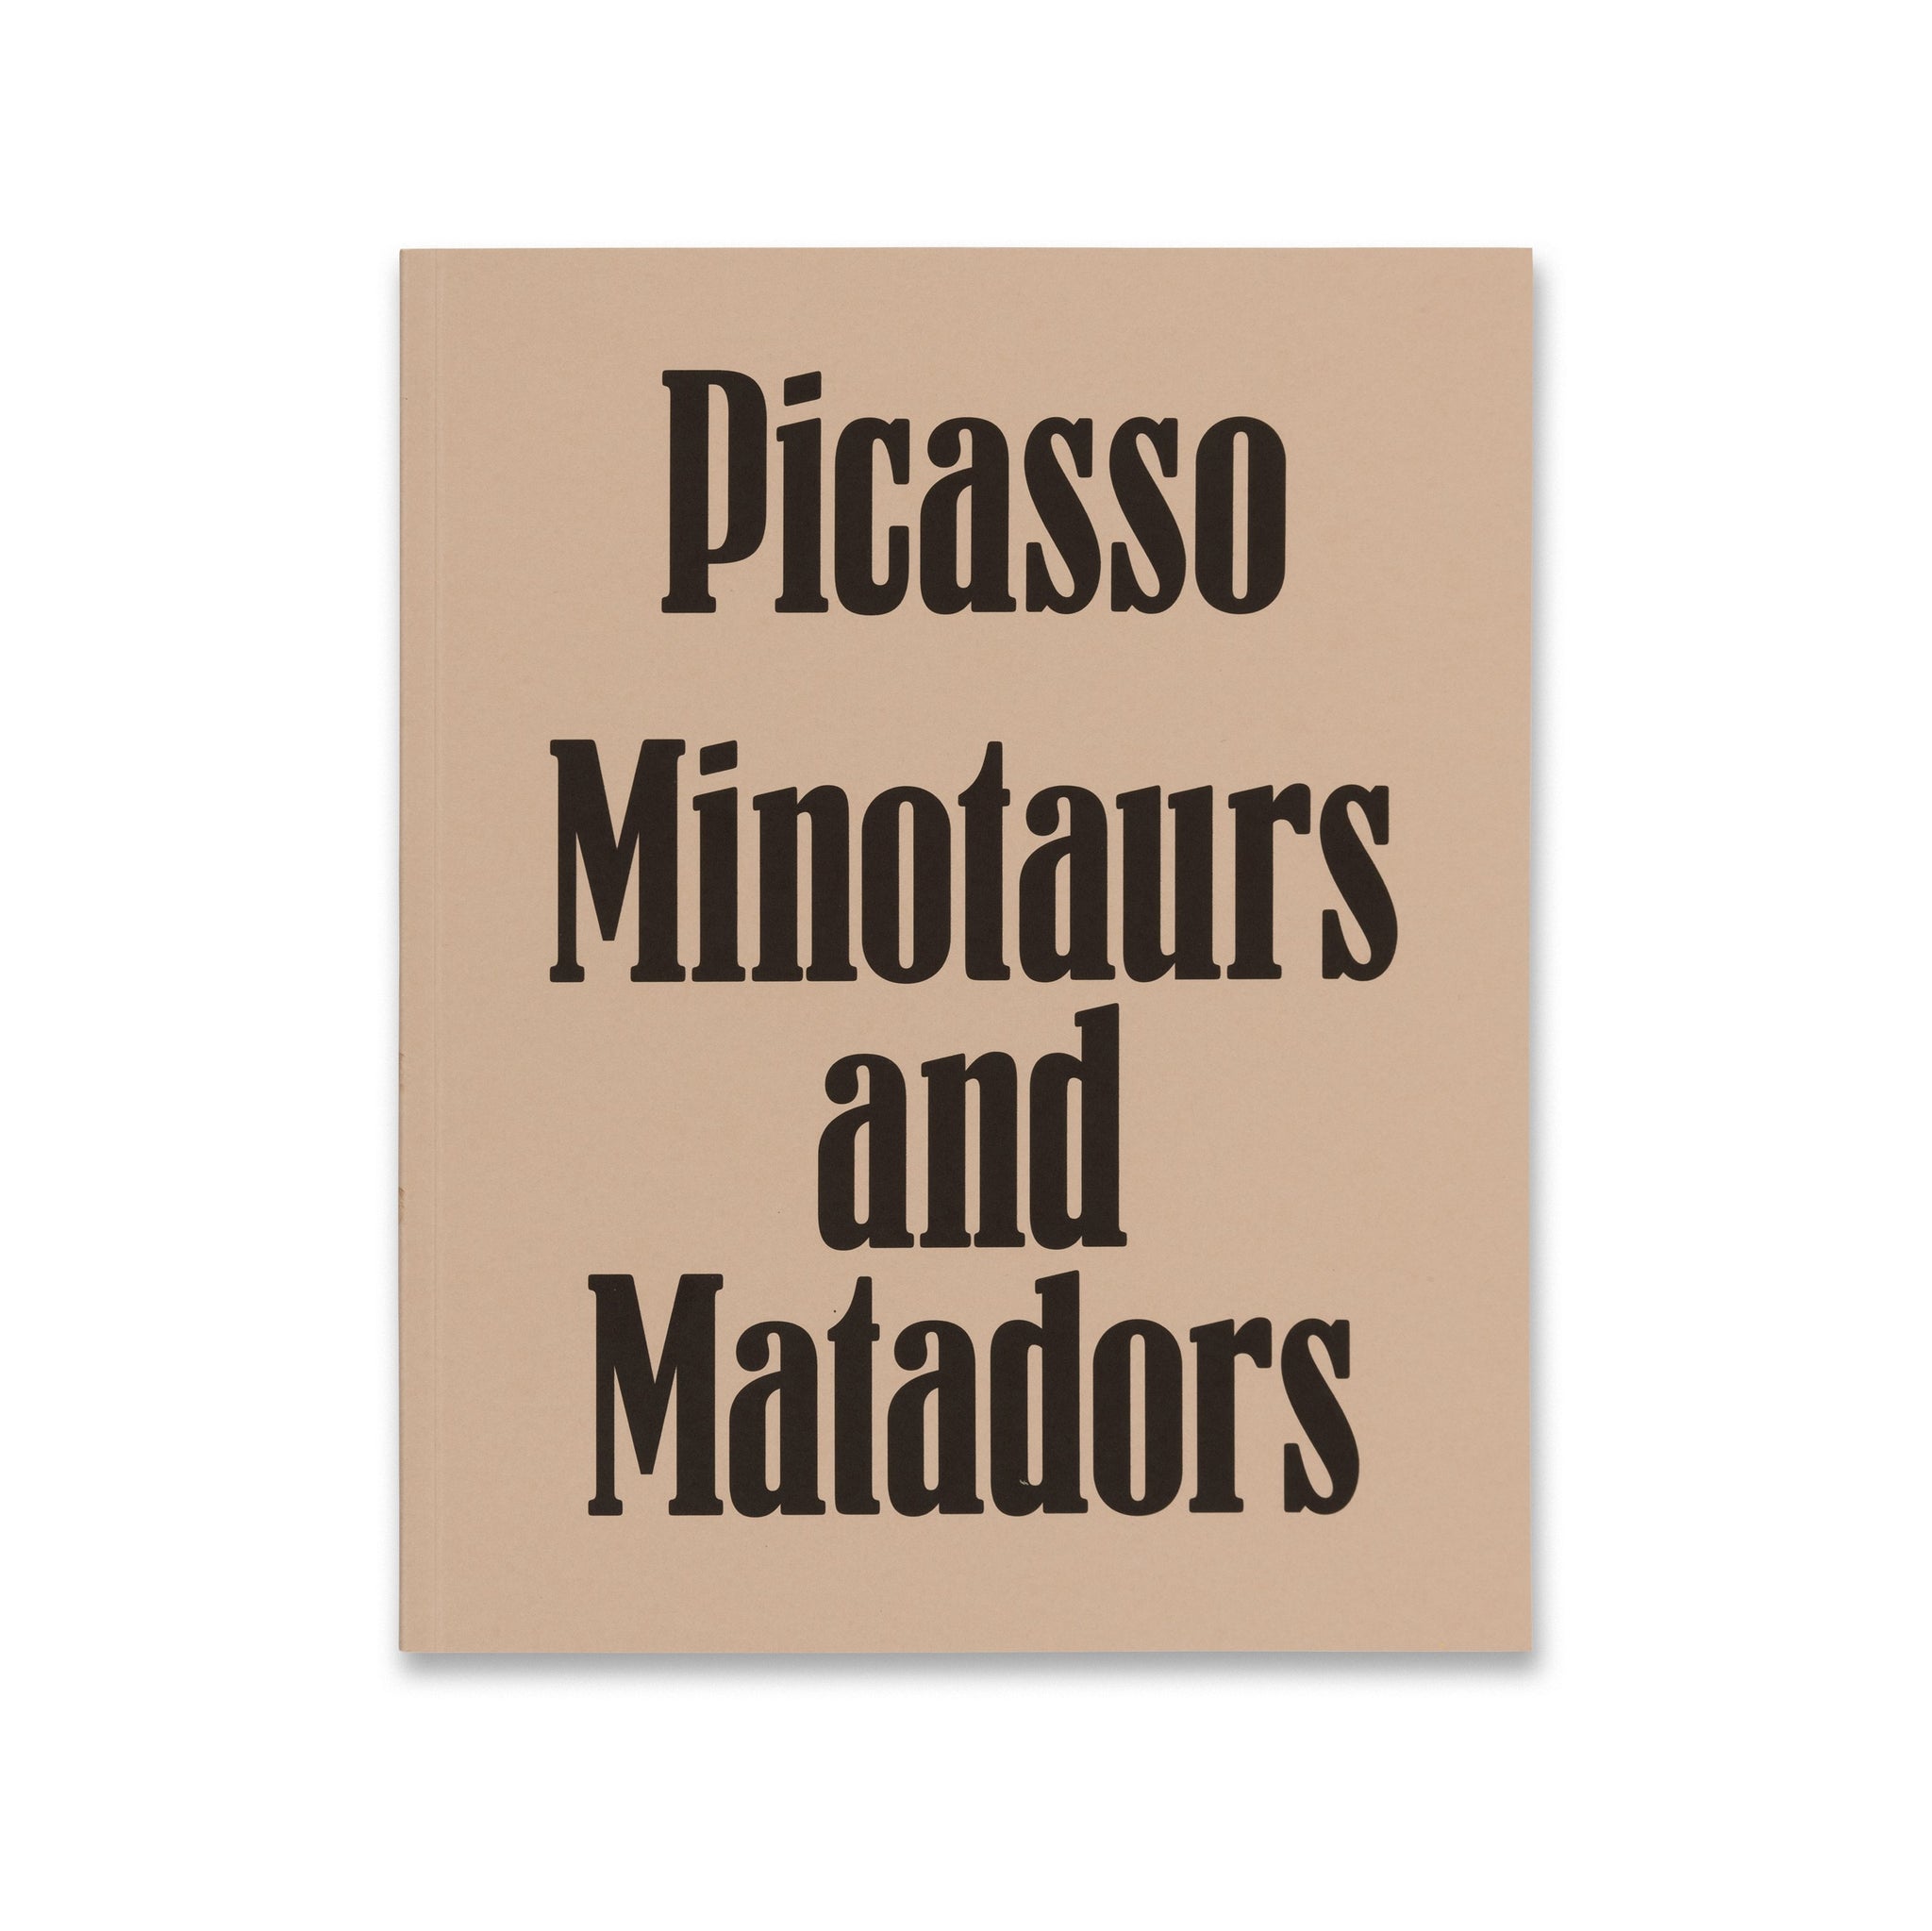 Cover of the book Picasso: Minotaurs and Matadors